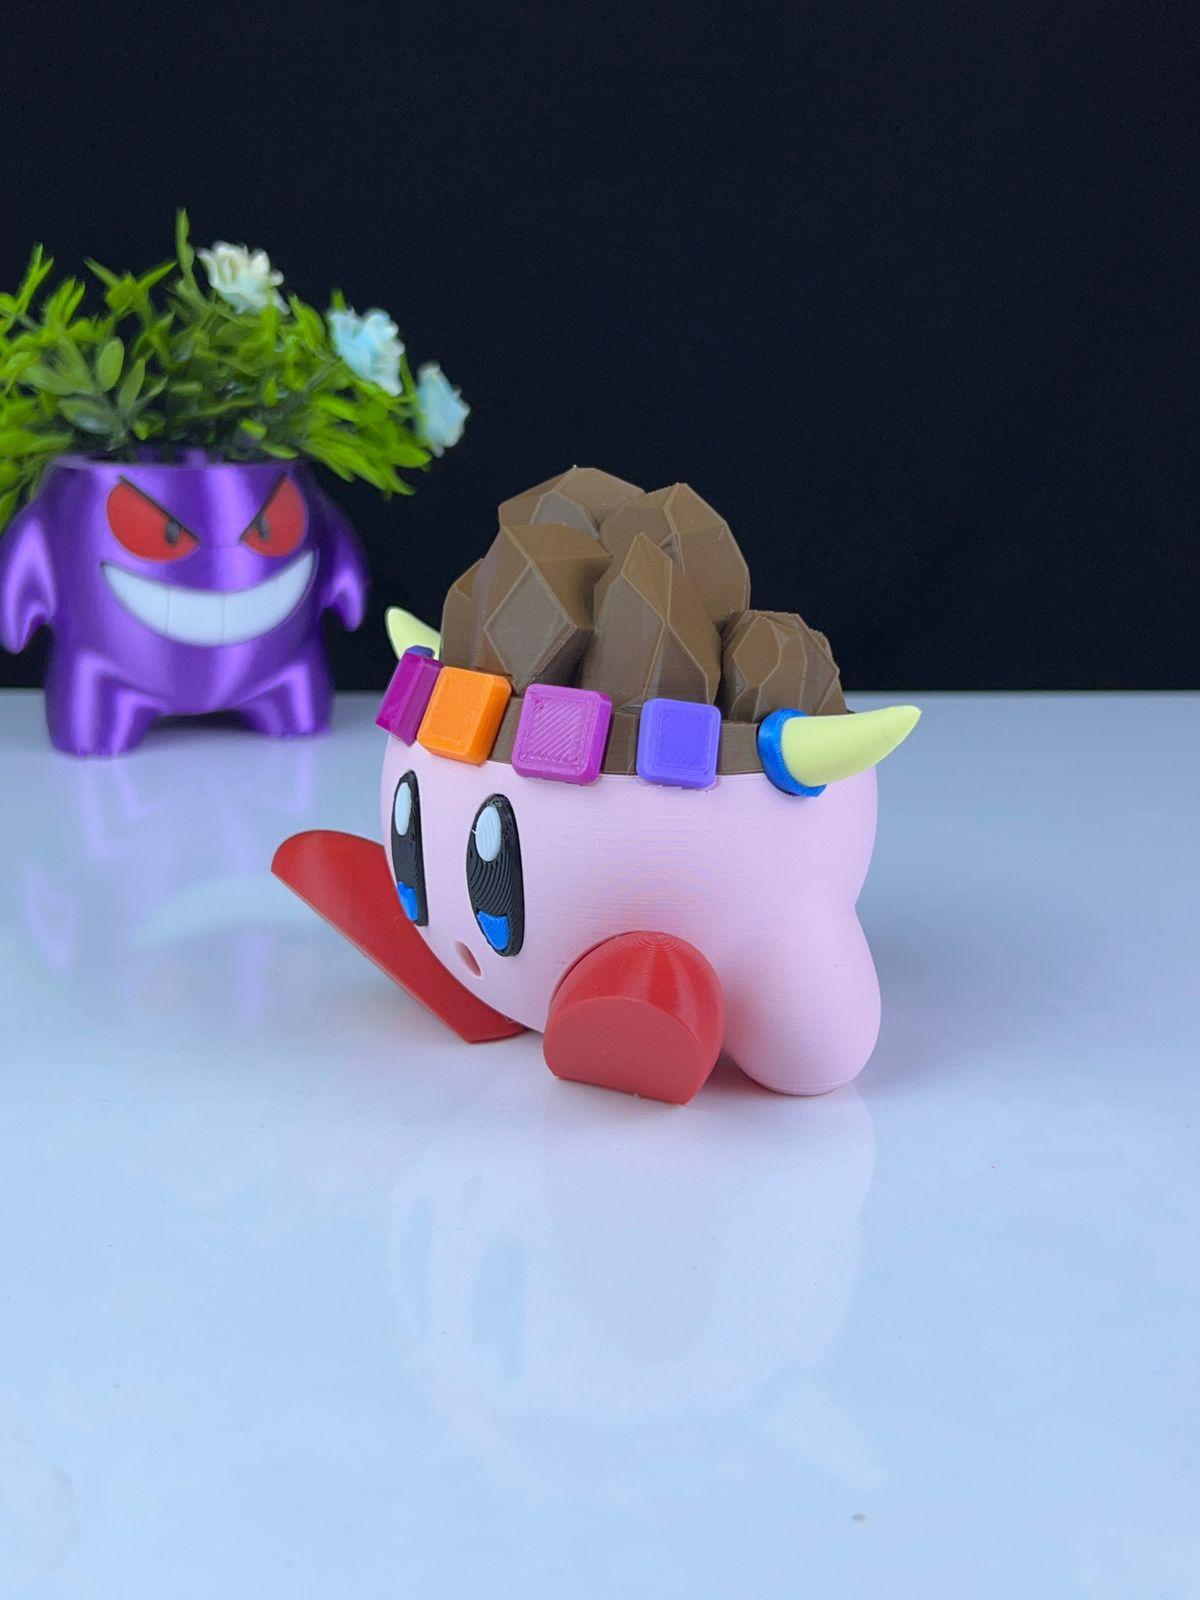 Stone Kirby - Multipart 3d model